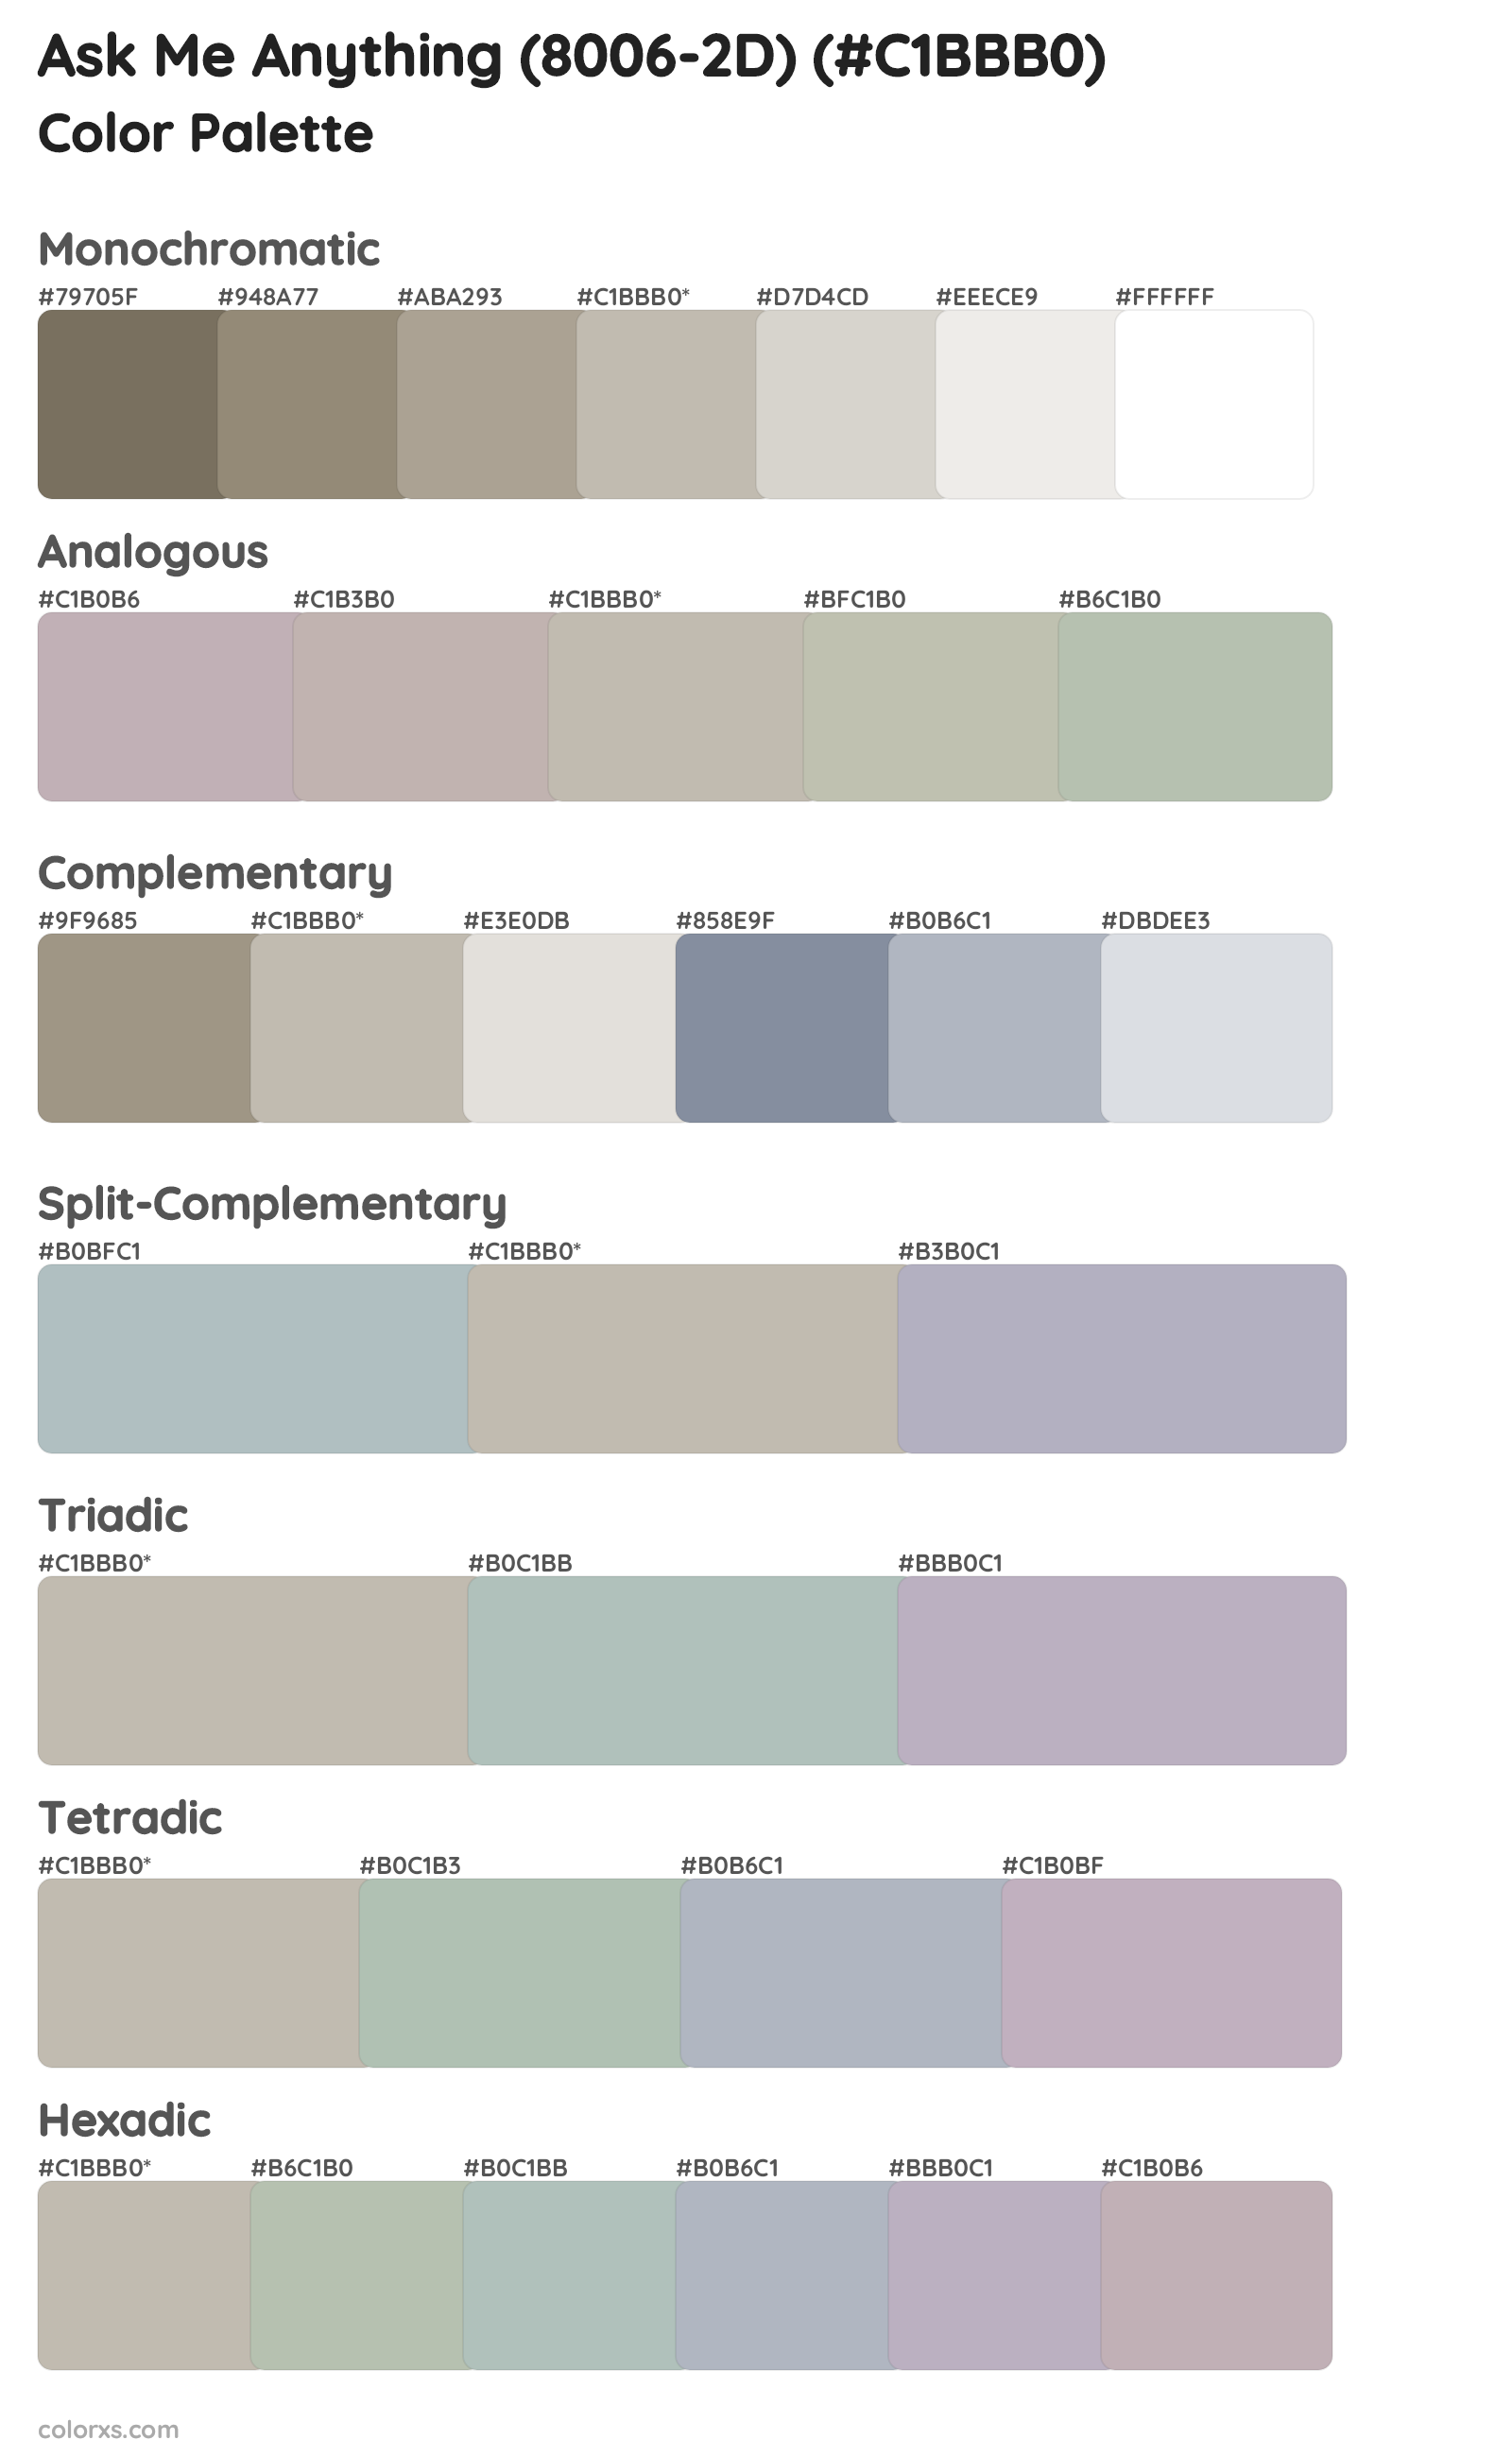 Ask Me Anything (8006-2D) Color Scheme Palettes